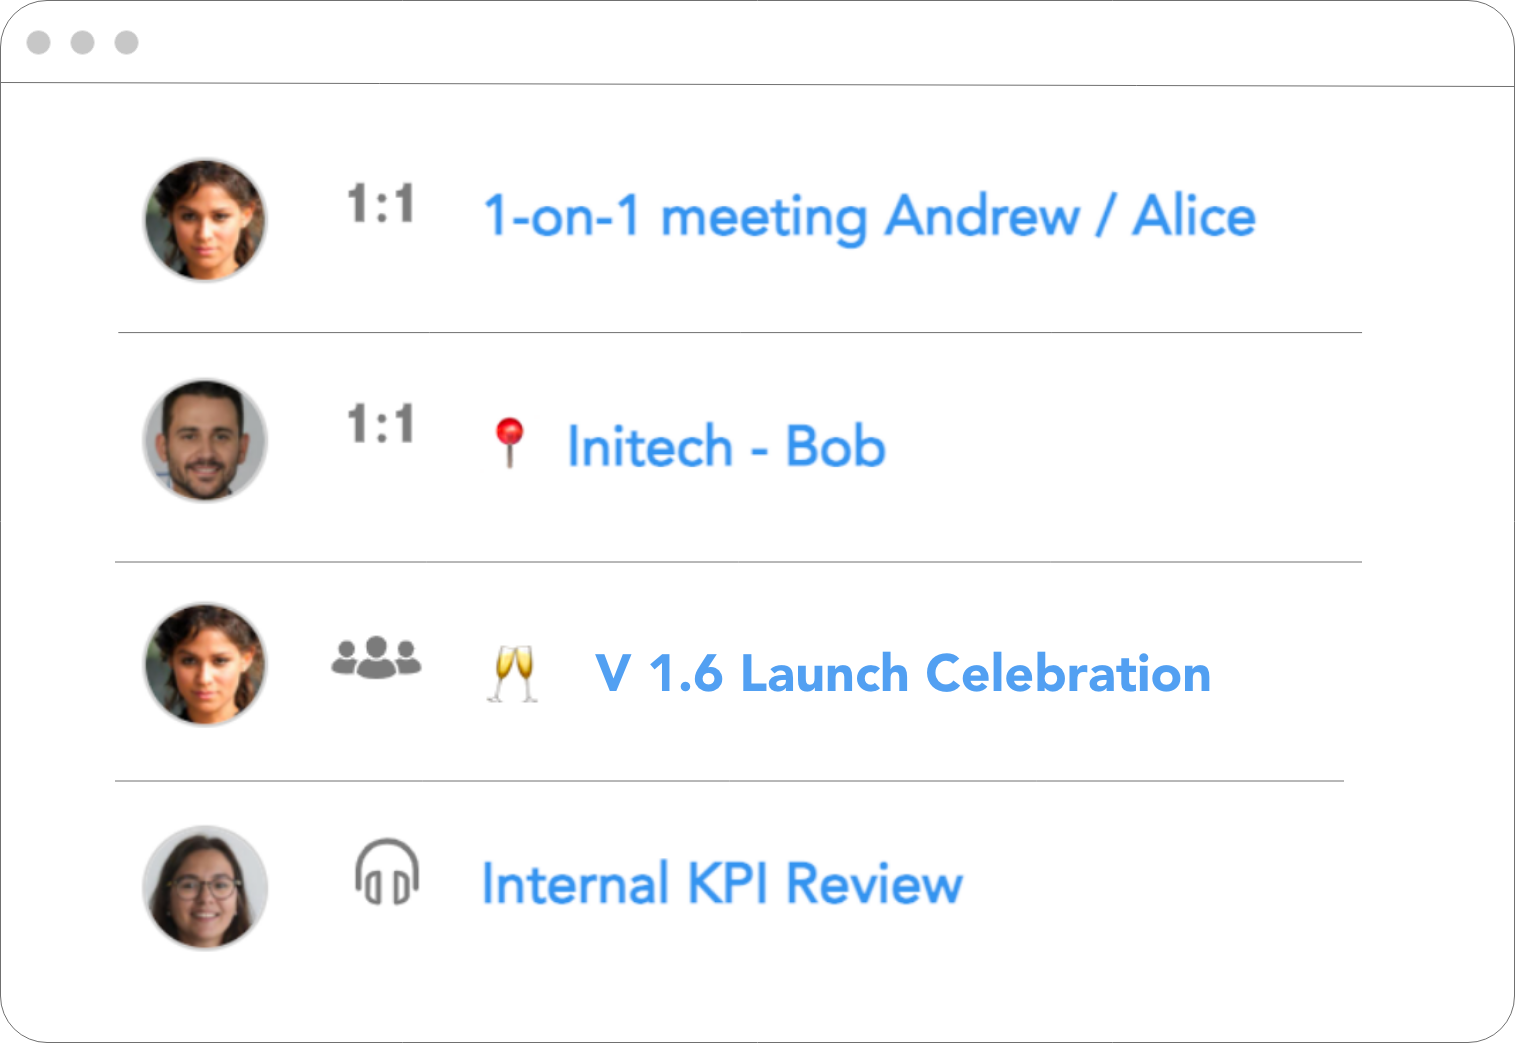 At-a-glance view: At a glance view gives you the upcoming meetings of the day with information about meetings. Need a reason to celeberate?